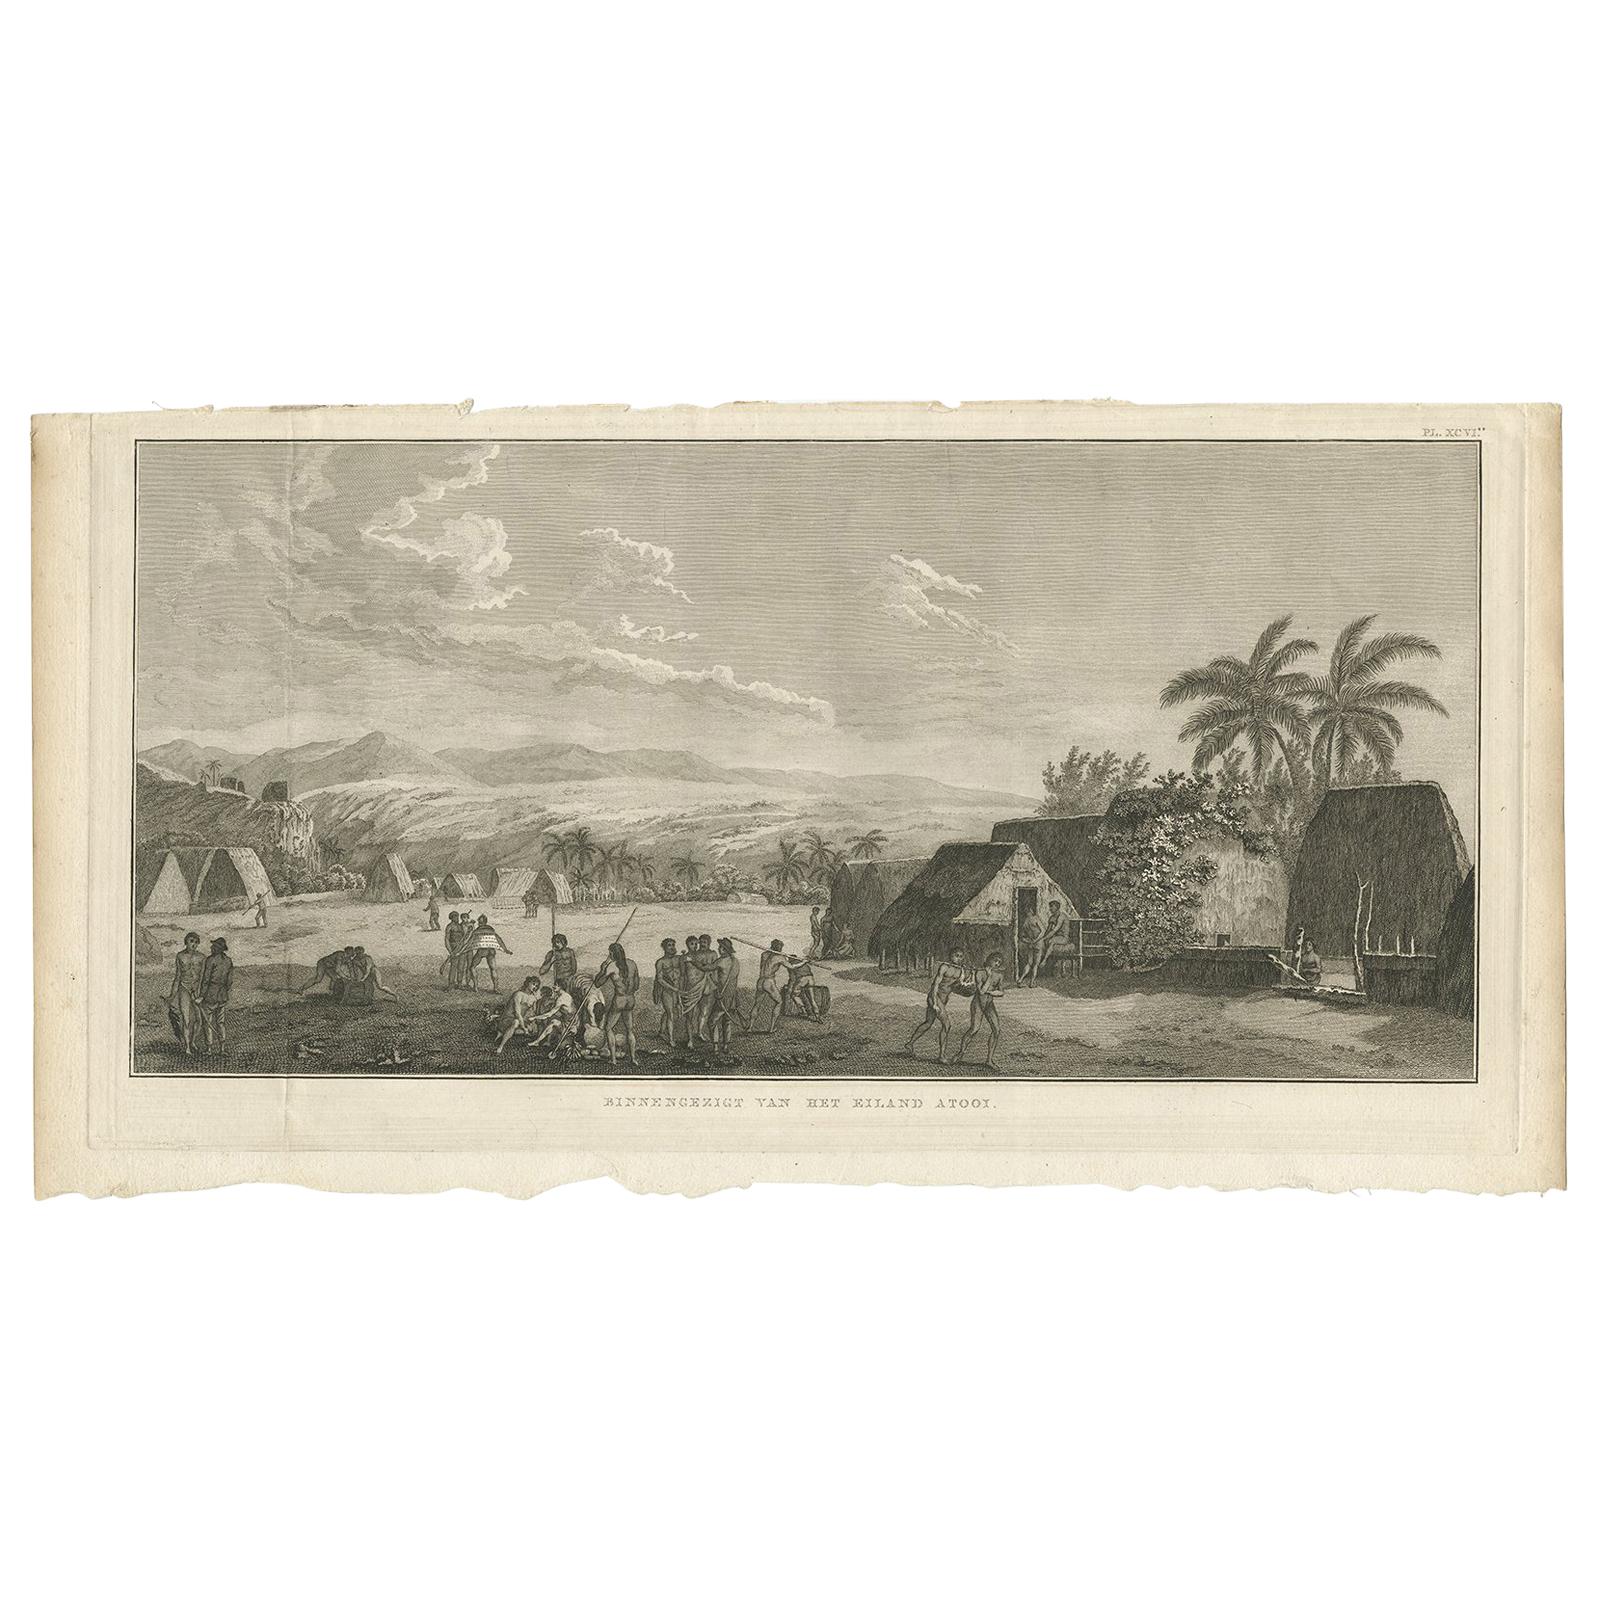 Antique Print of Atooi Island by Cook, 1803